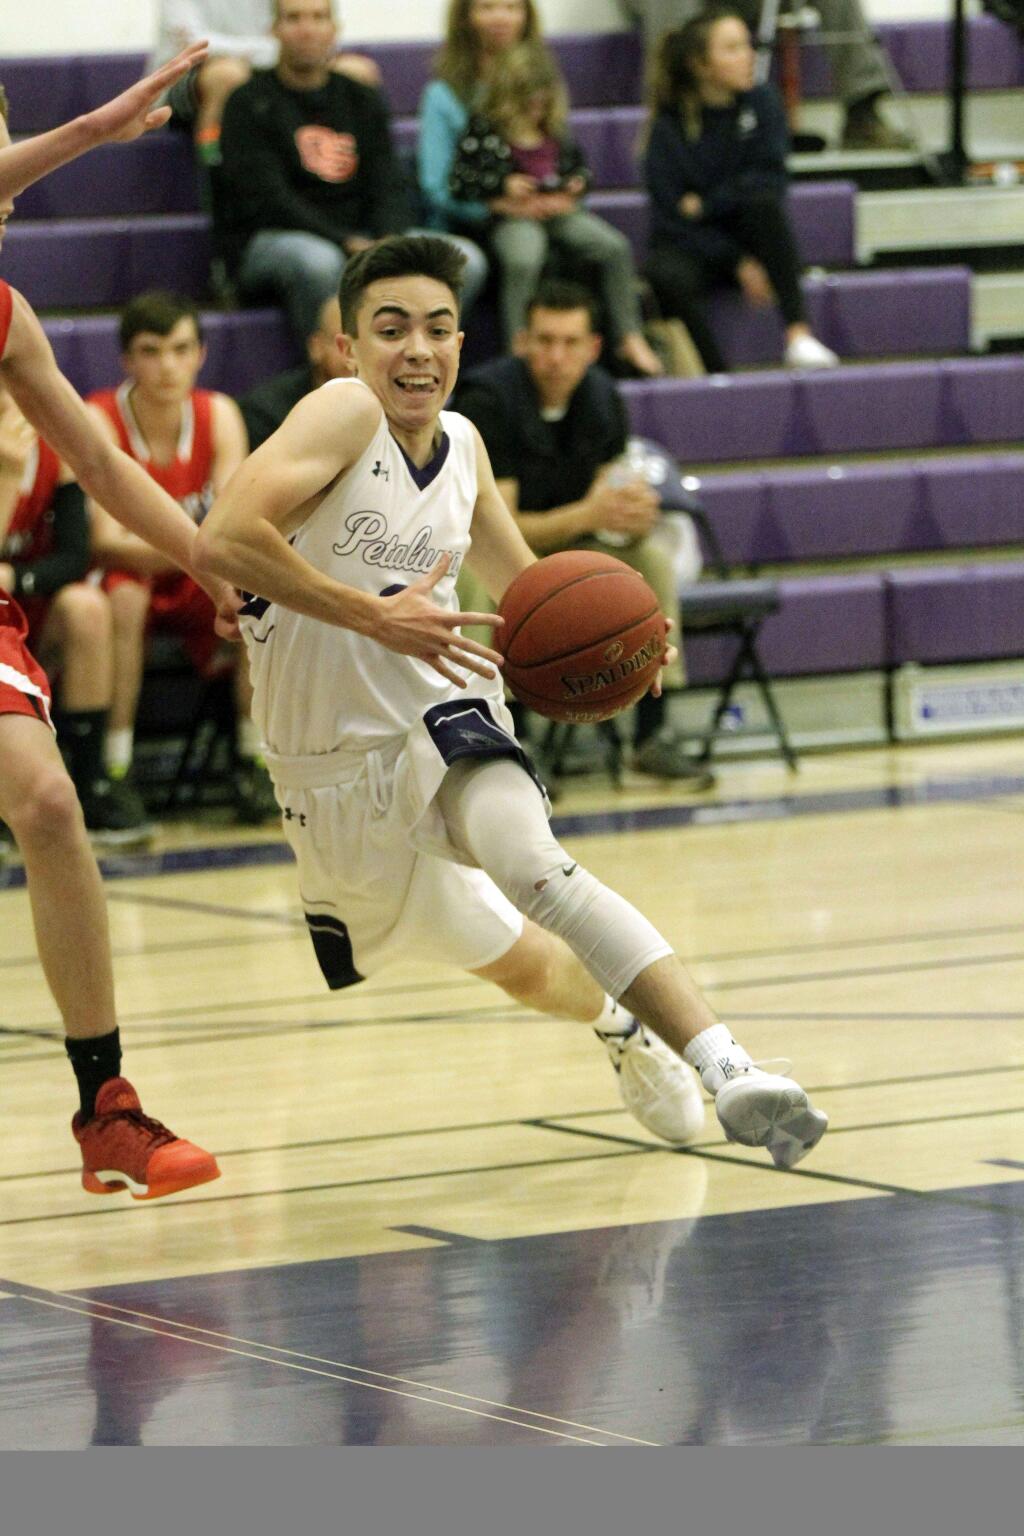 DWIGHT SUGIOKA/FOR THE ARGUS-COURIERPetaluma's Robbie Isetta drives to the hoop. The 3-year varsity veteran returns to lead the Trojans into the VVAL.